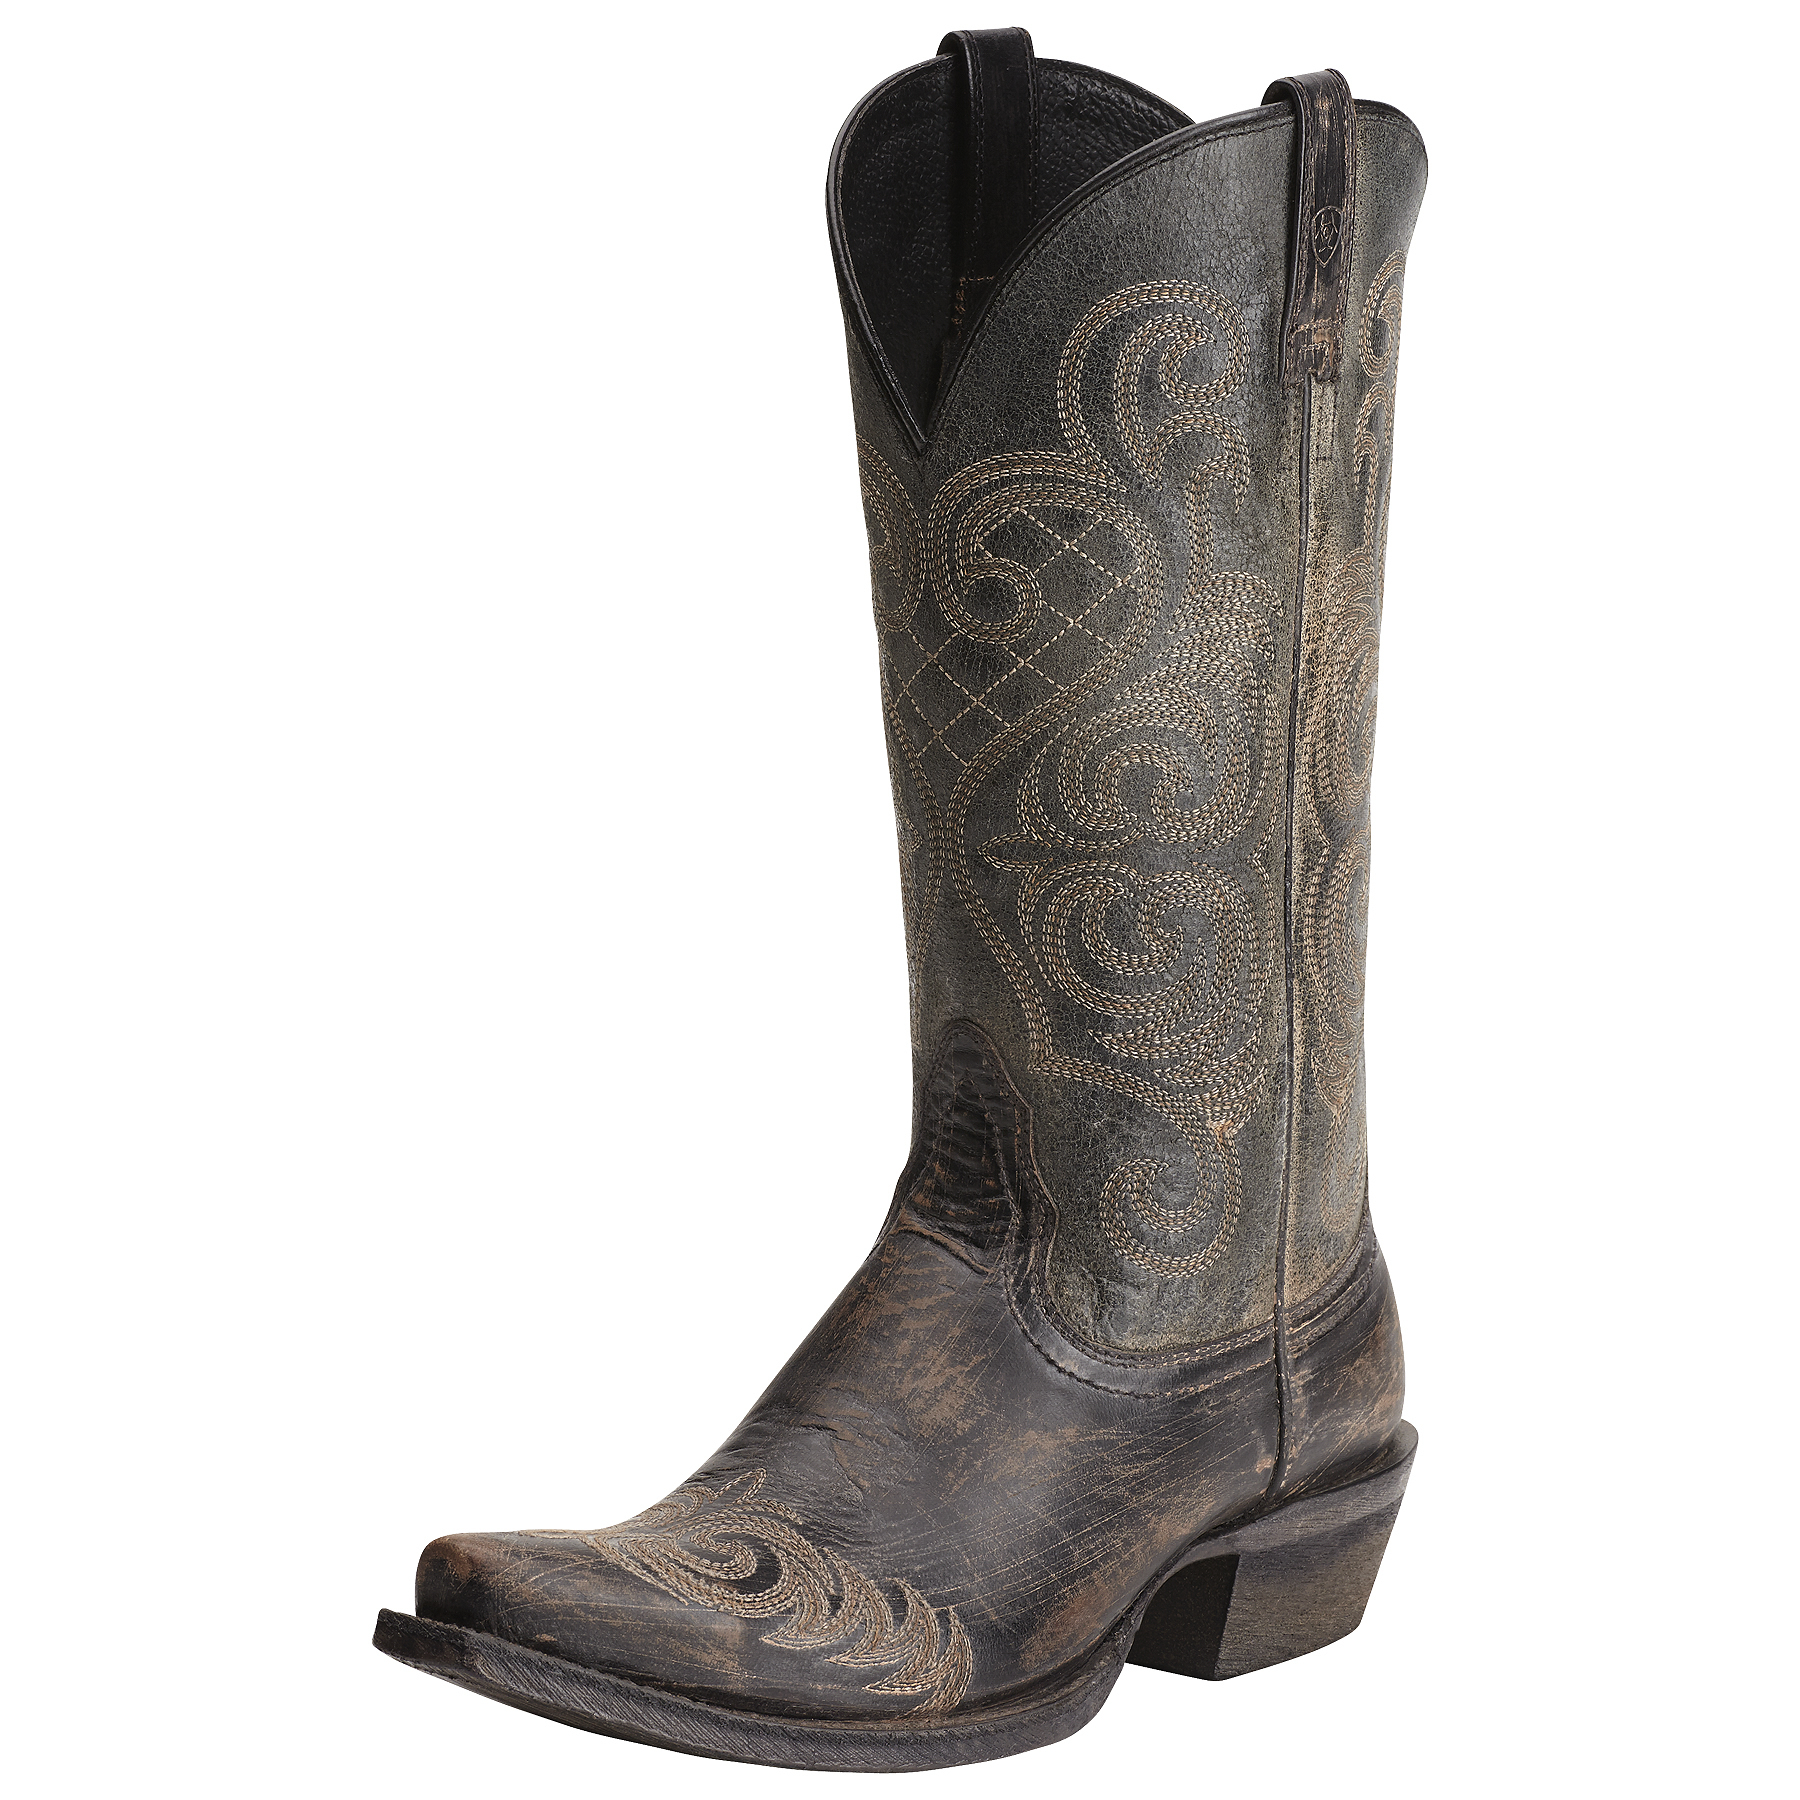 Pungo Ridge - Ariat Bright Lights Fashion Boots - Rustic Black, Women&#39;s Clearance Boots, 10015375